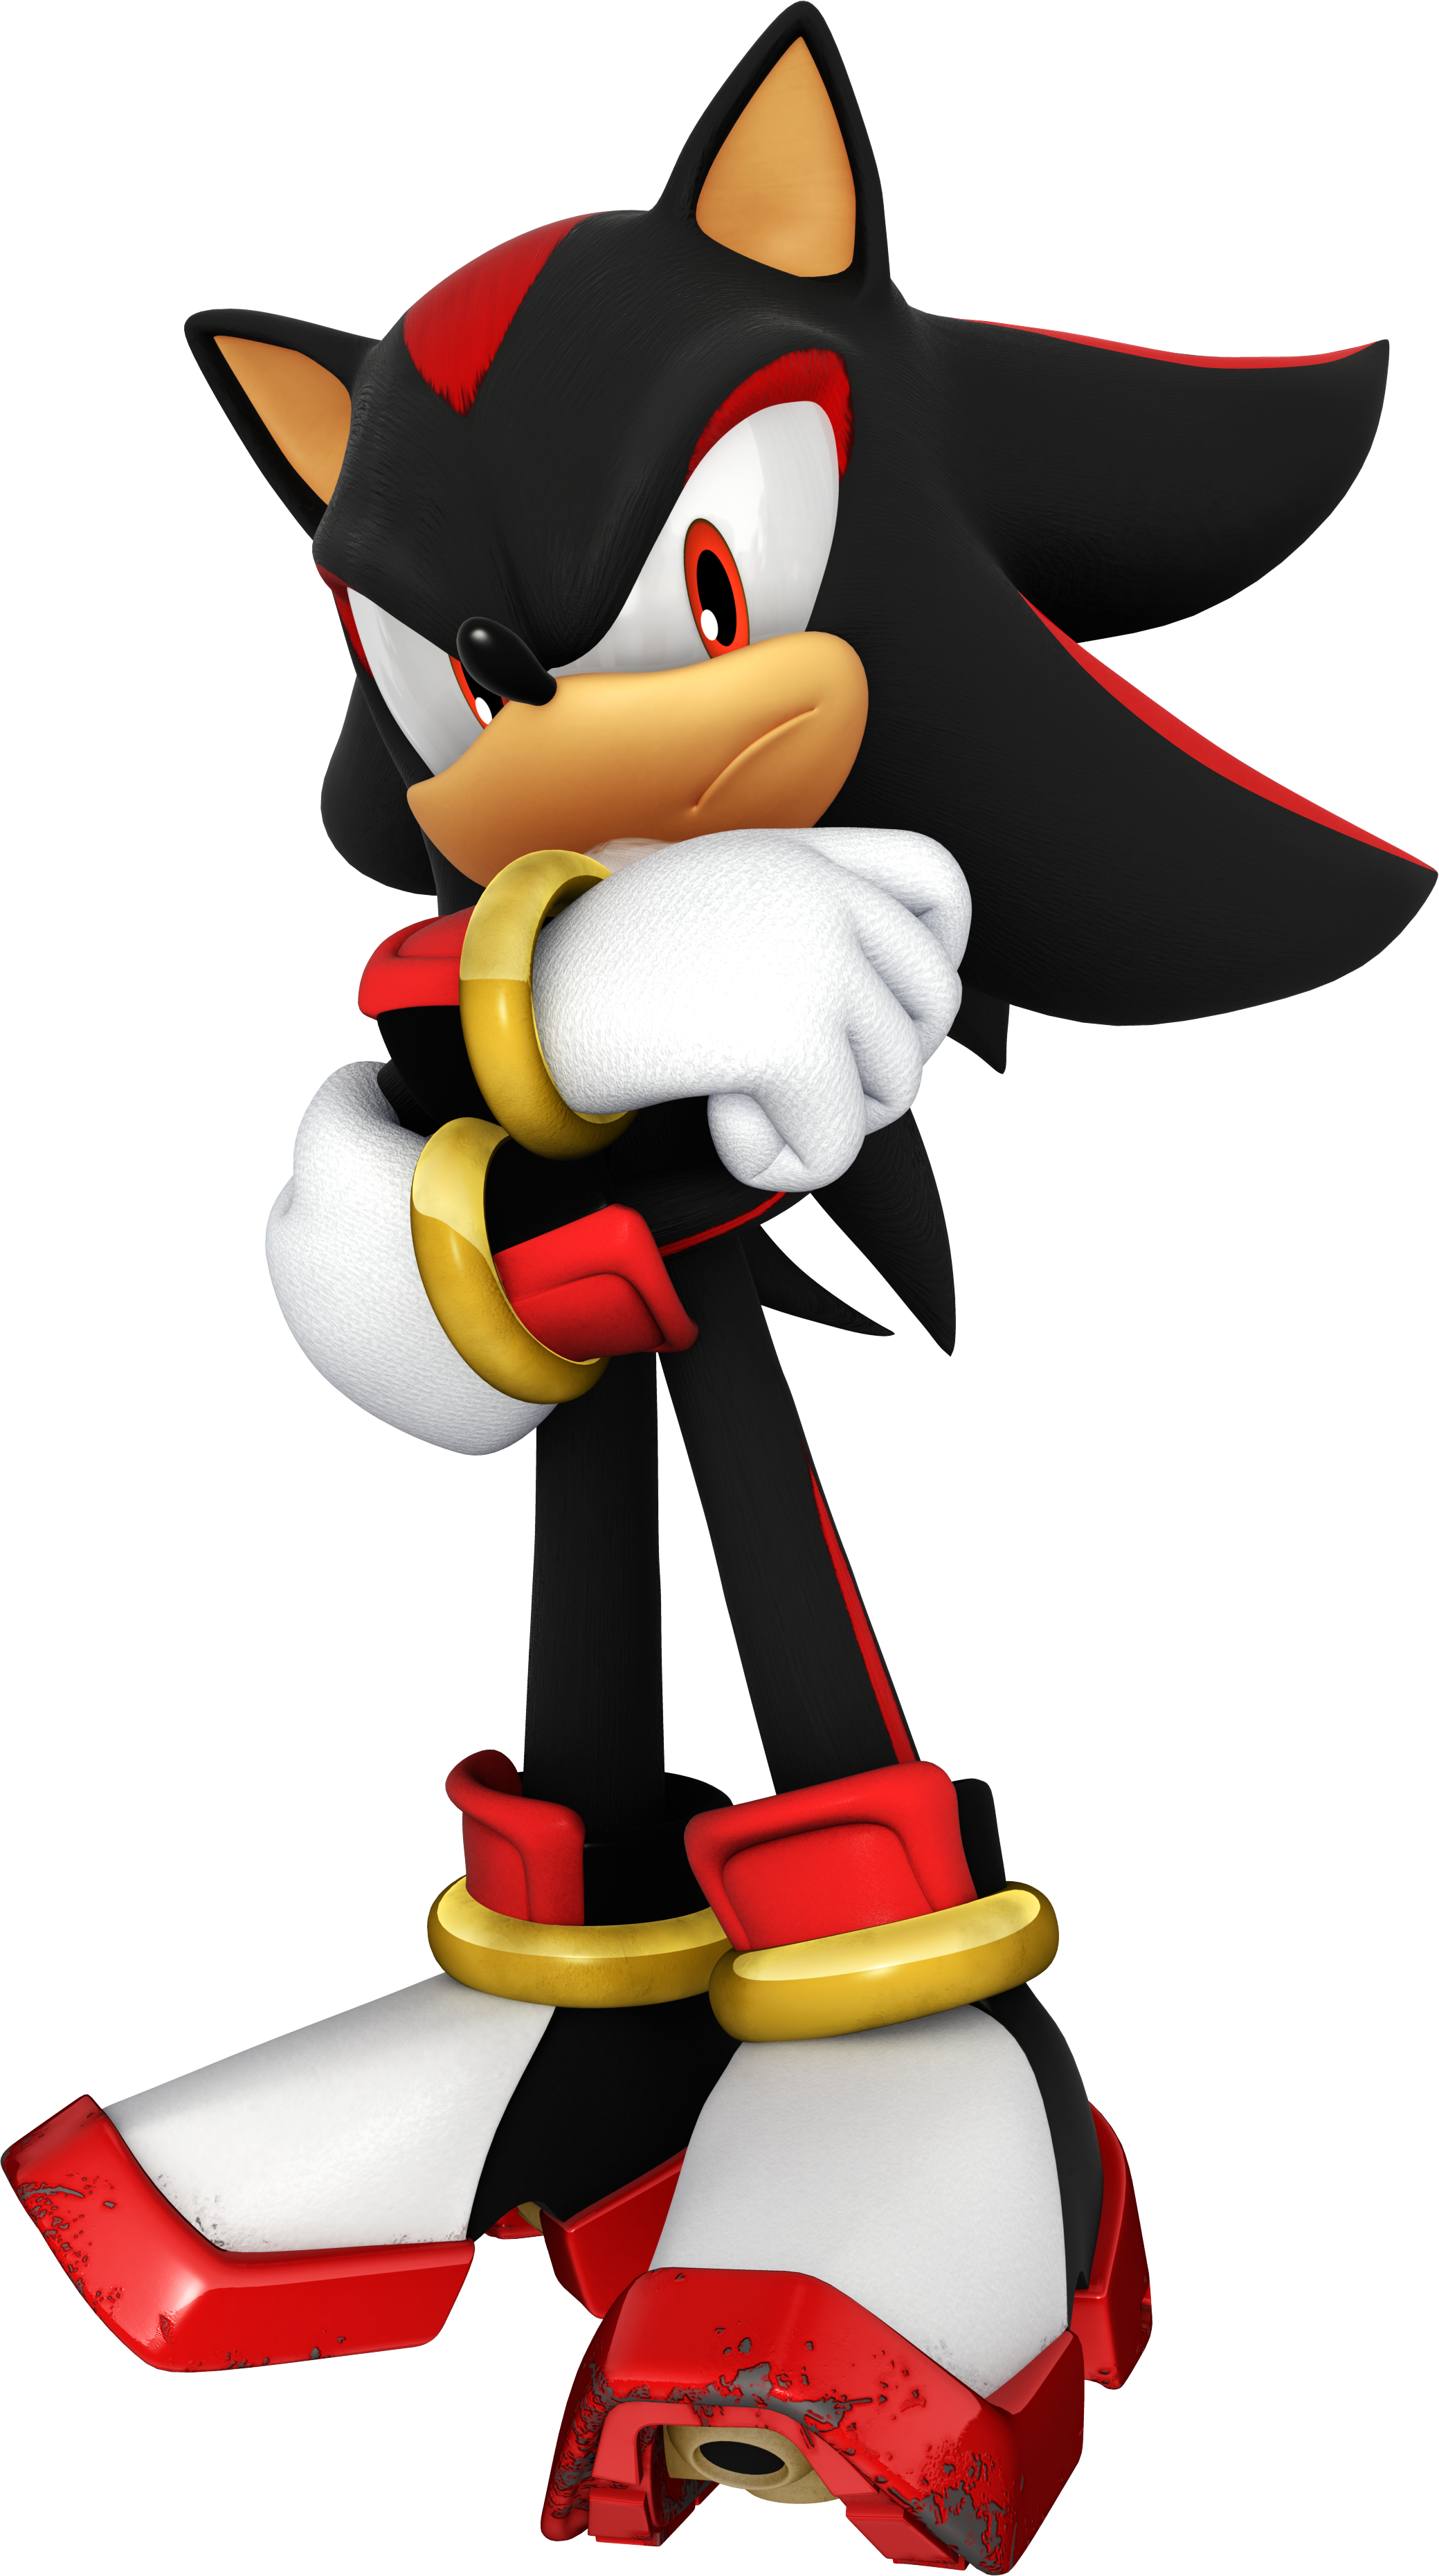 Shadow the Hedgehog - Pooh&#039;s Adventures Wiki